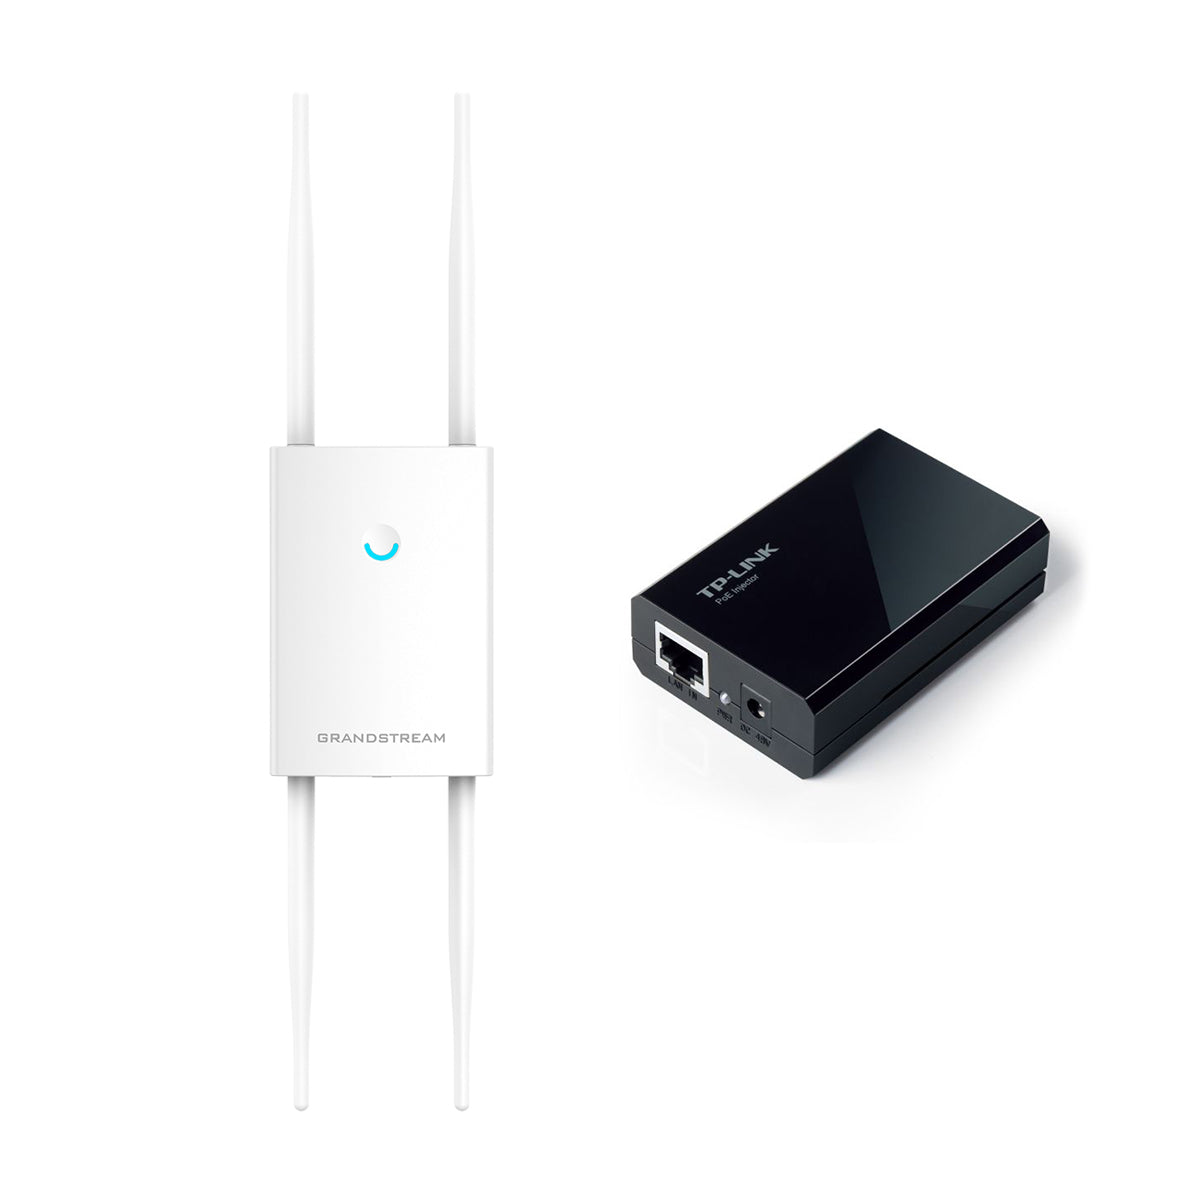 GWN7630LR (con Inyector Poe) Ap 802.11ac, Dualband 2.3gbps